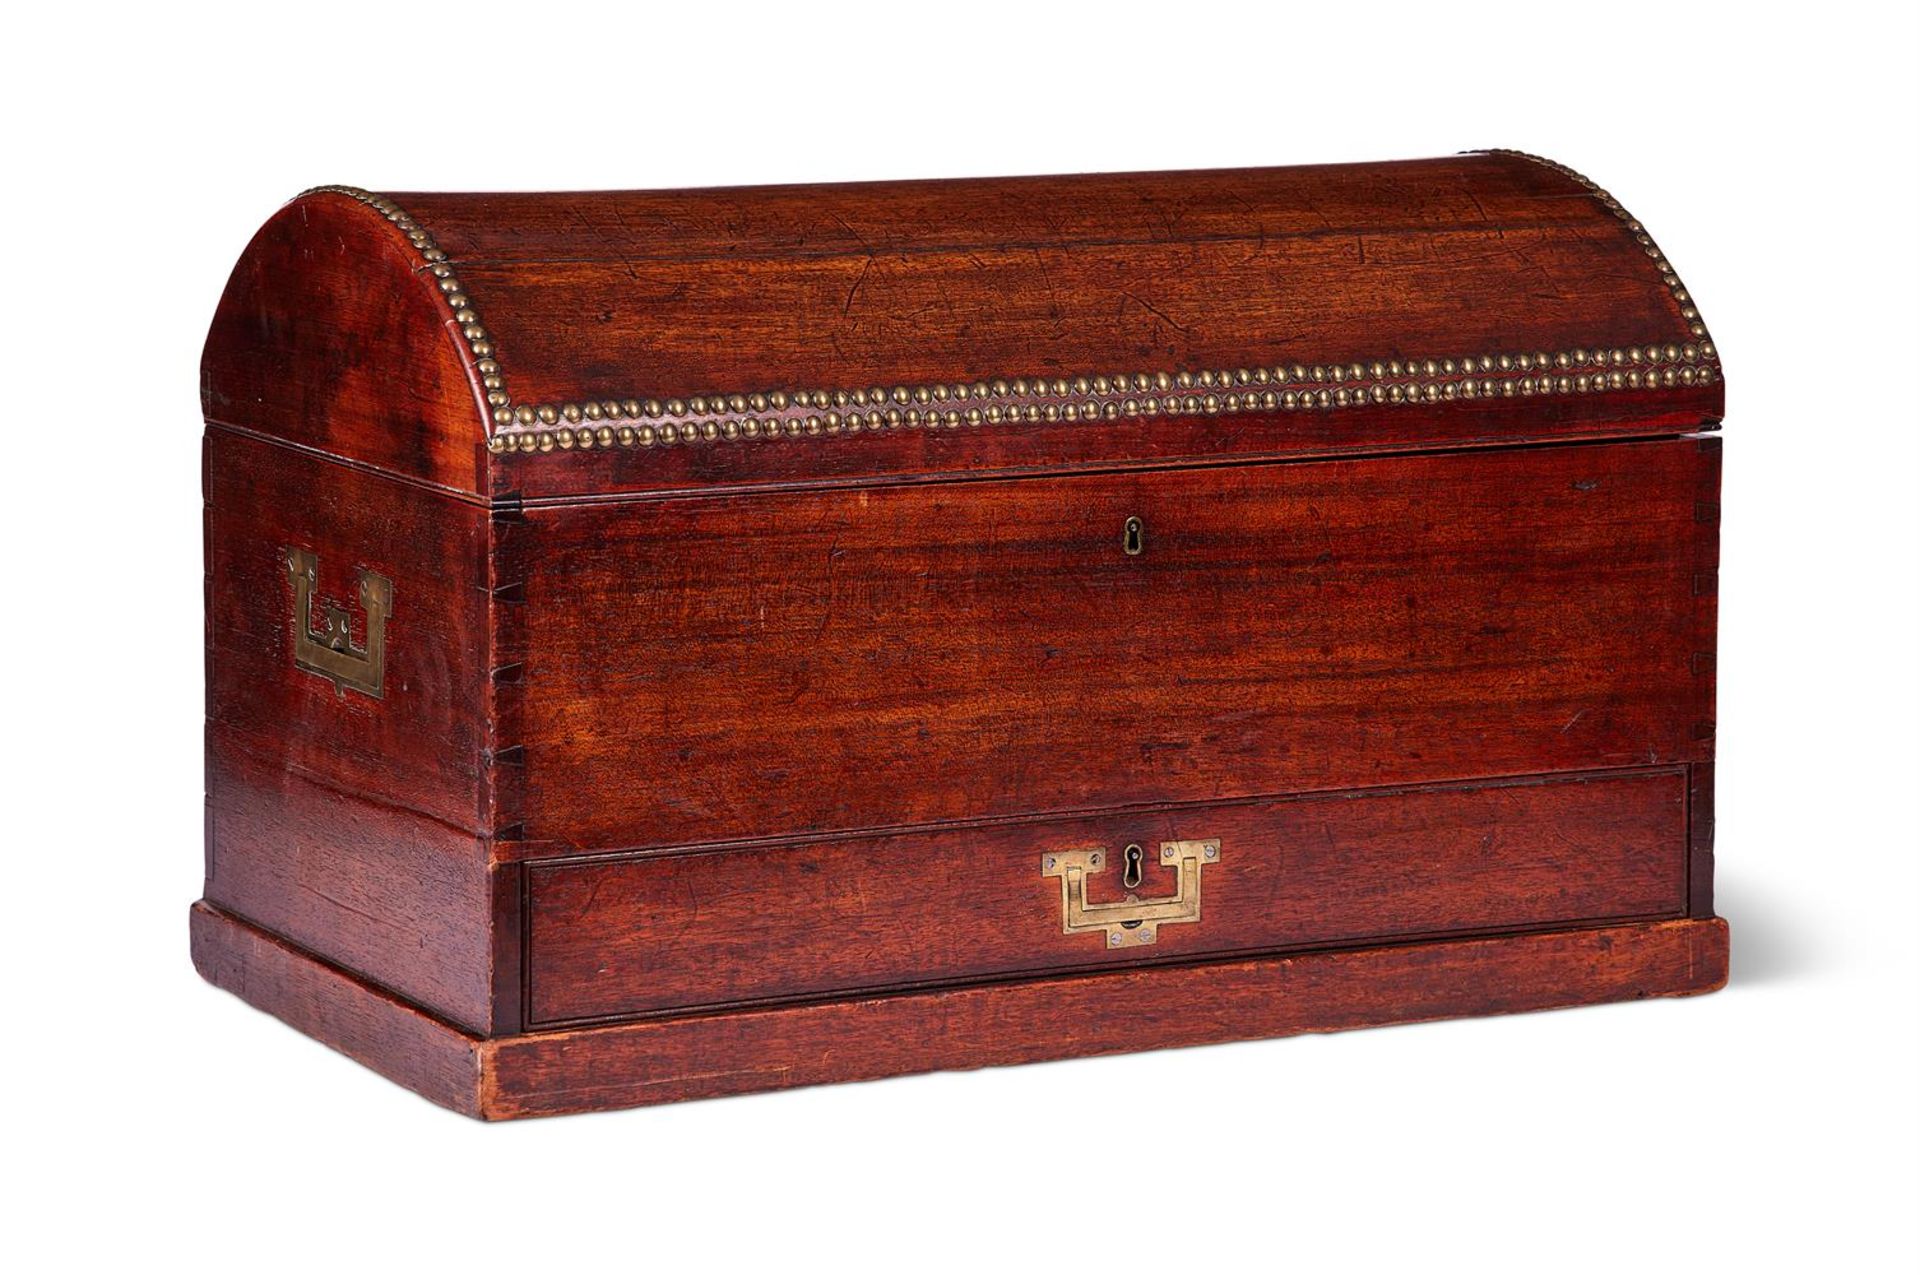 A GEORGE III MAHOGANY AND BRASS STUDDED CAMPAIGN TRUNK, LATE 18TH/EARLY 19TH CENTURY